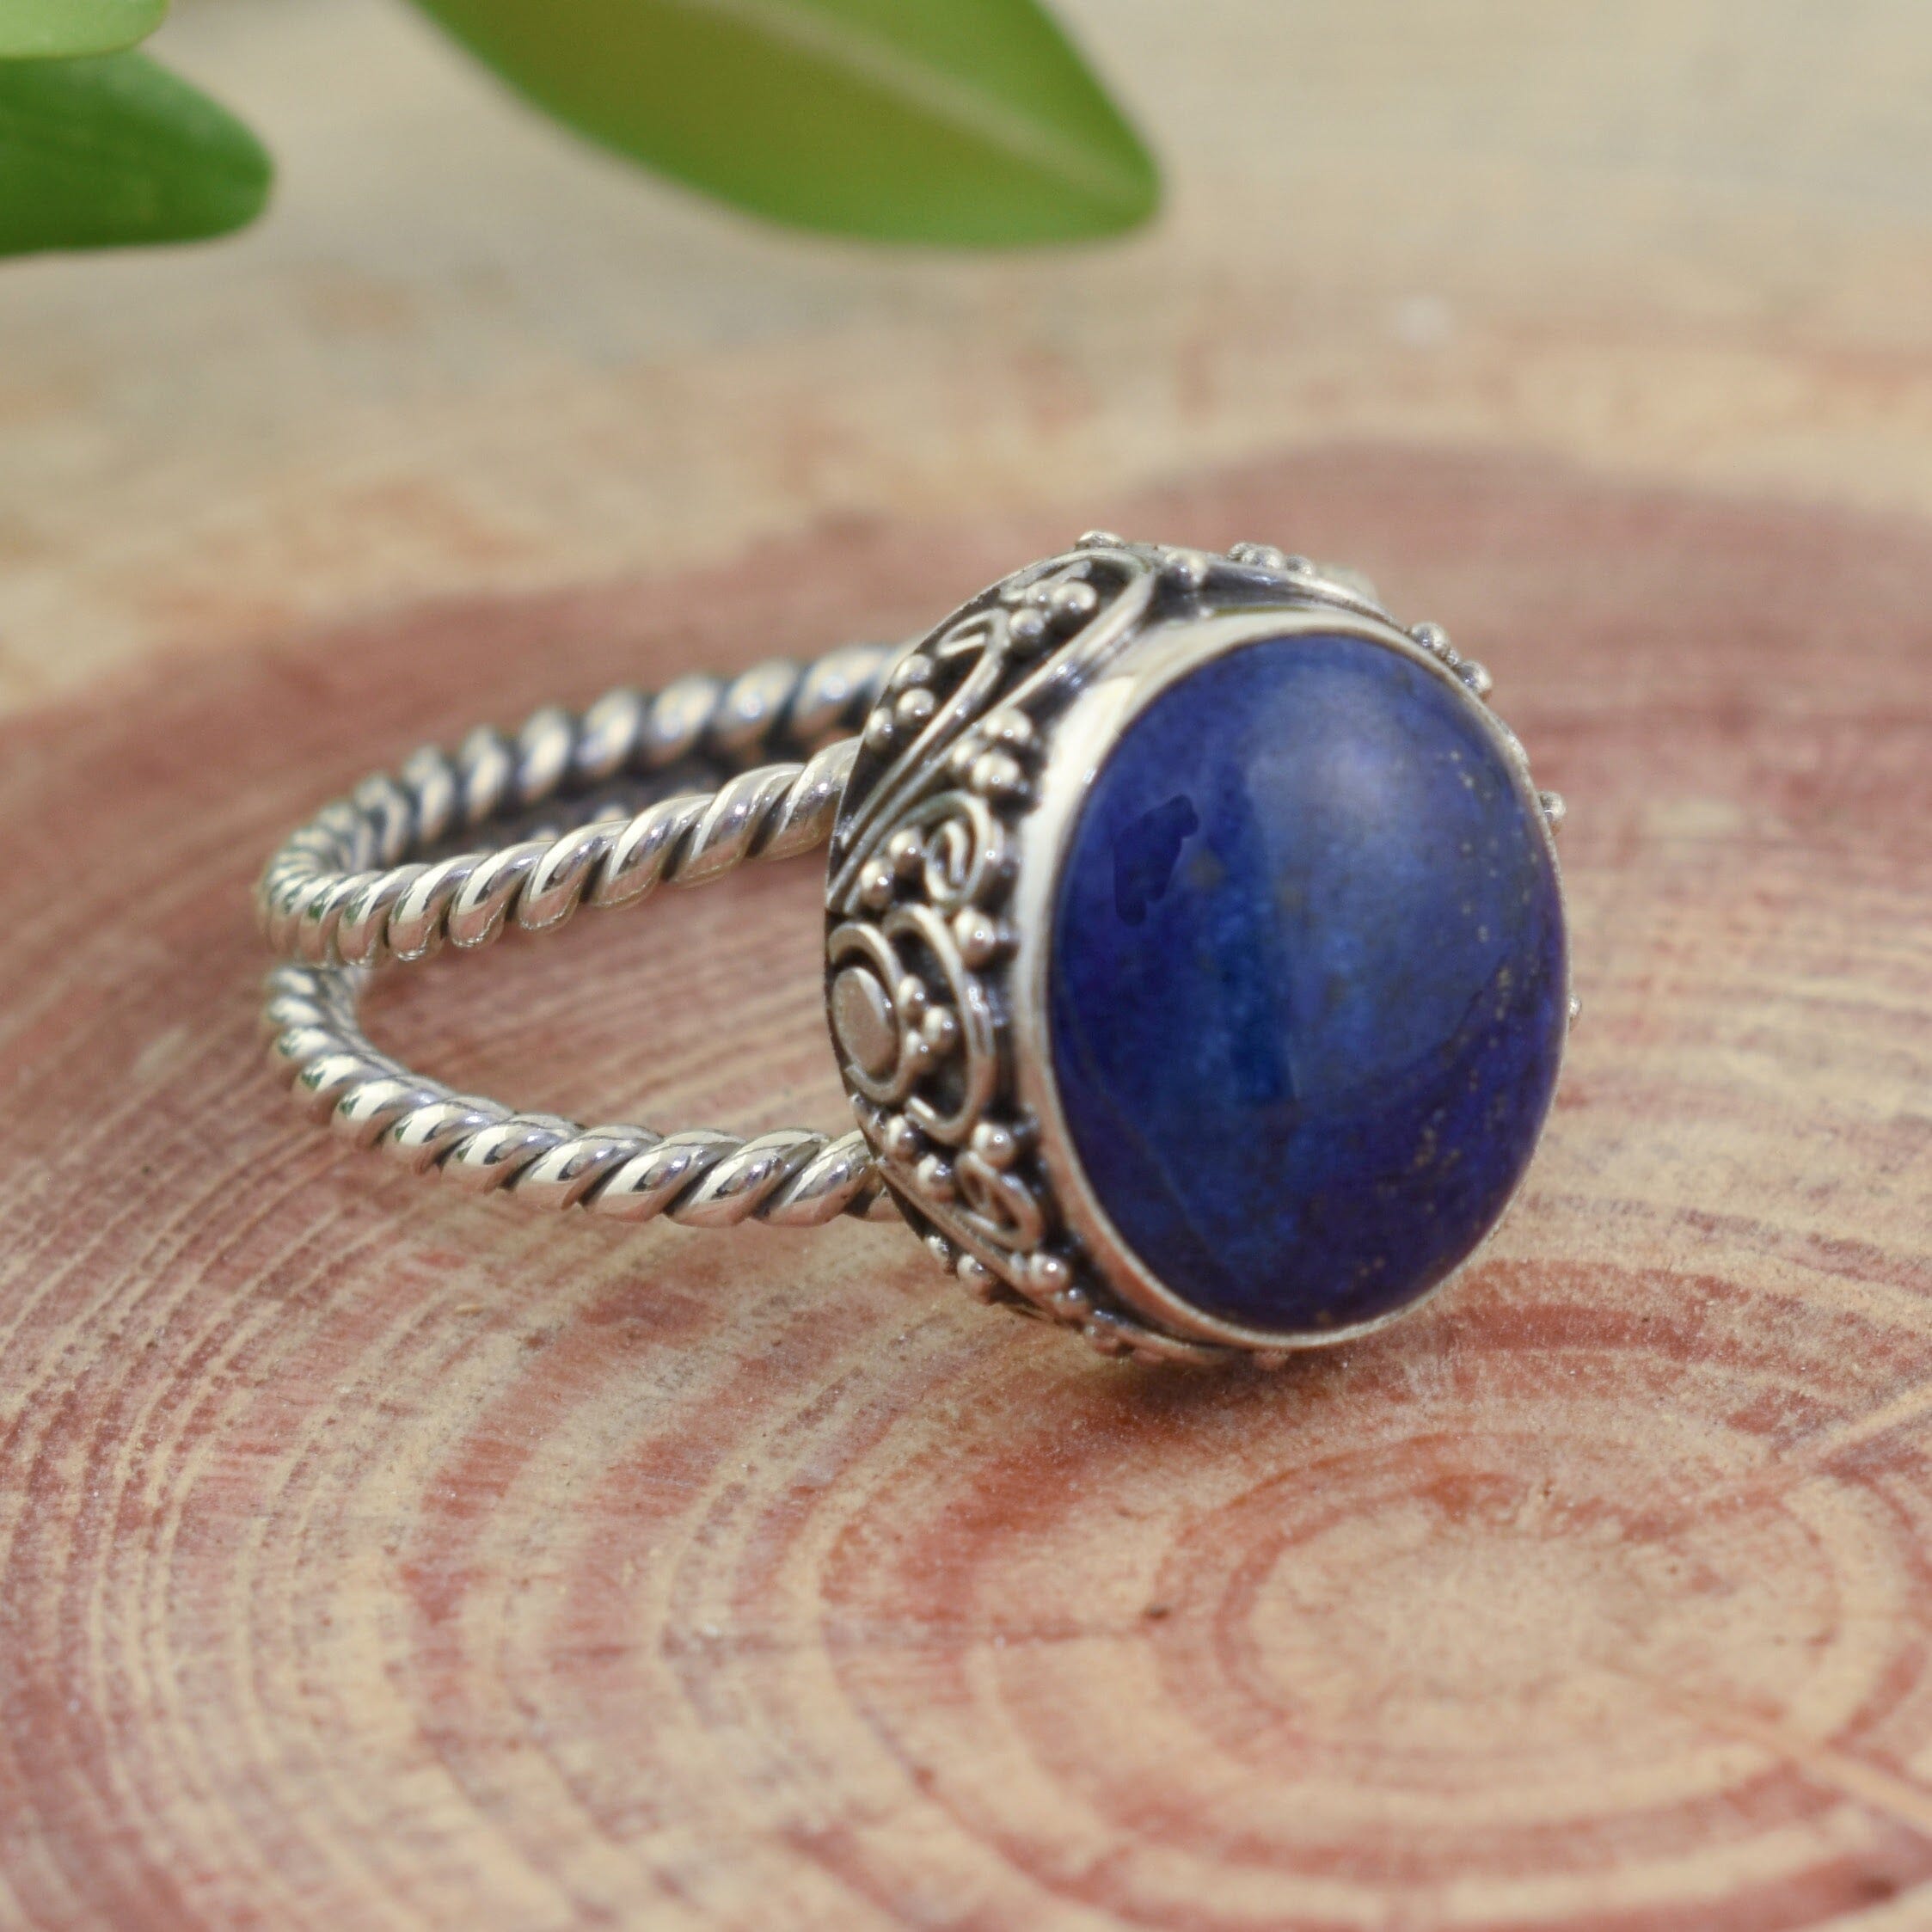 Oval-shaped blue lapis ring with ornate sterling silver band